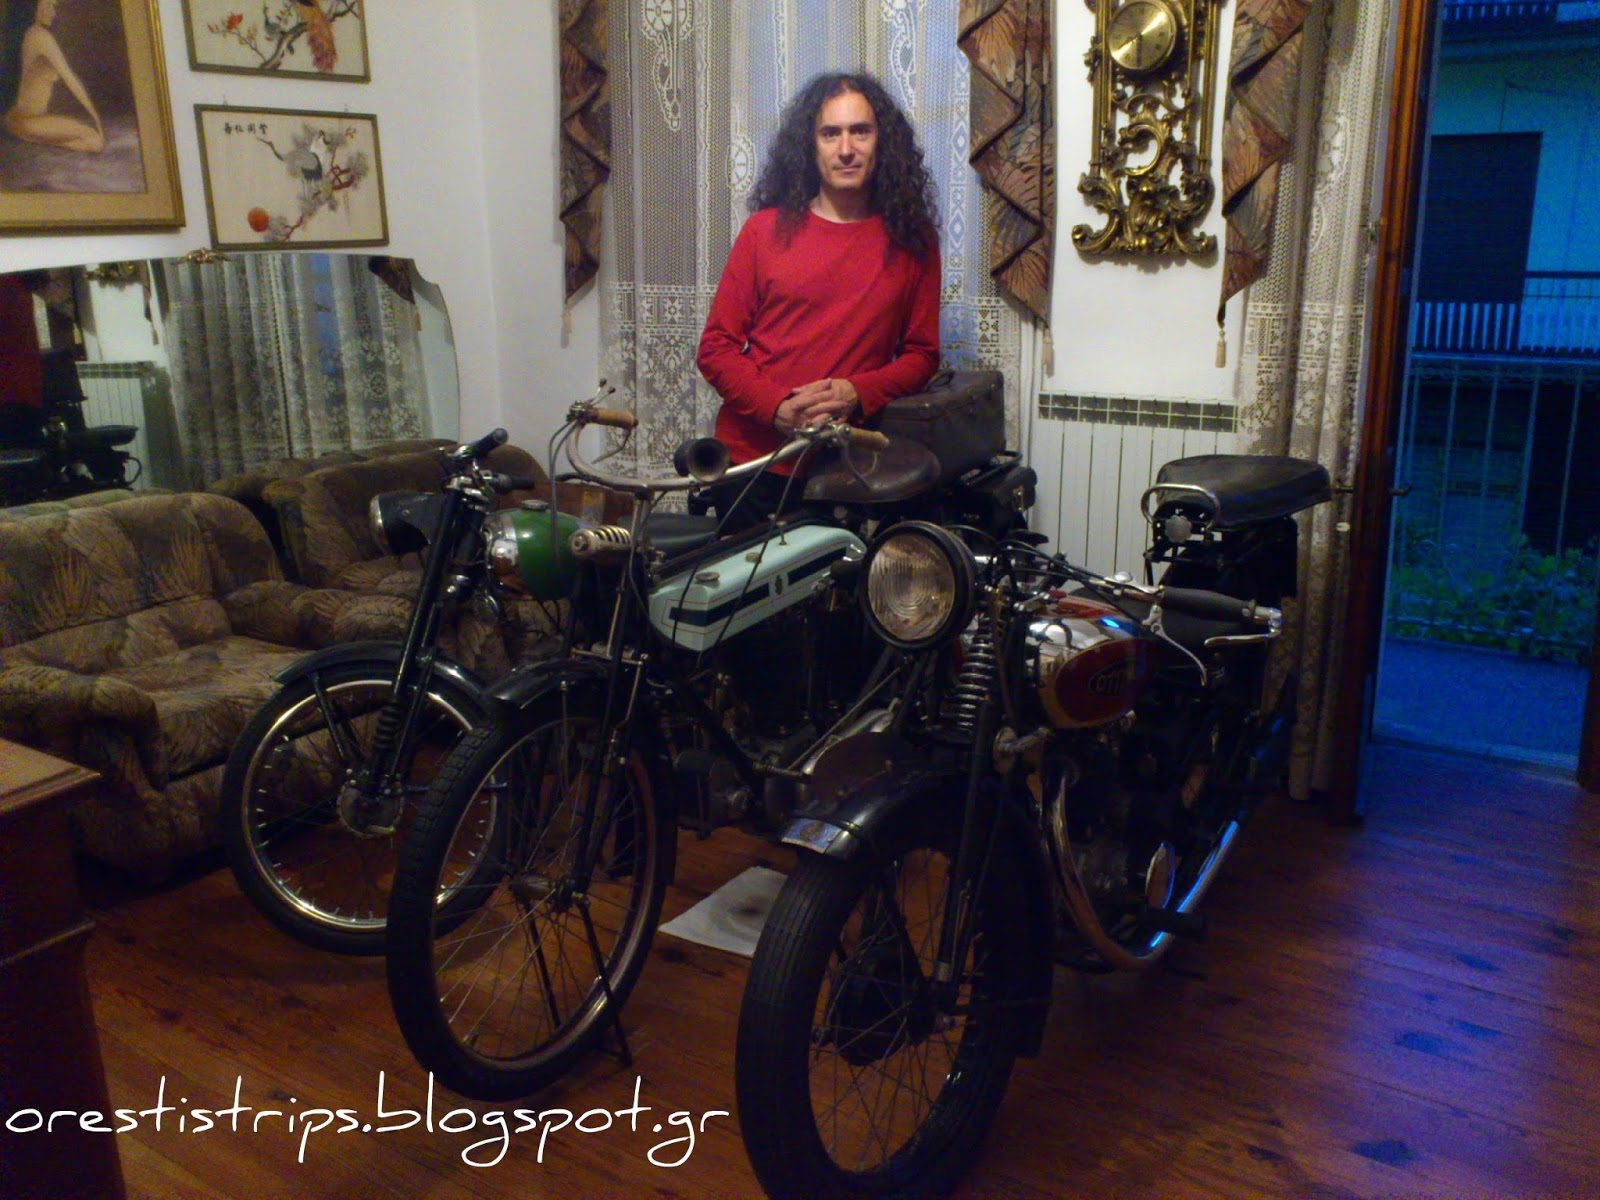 Me behind some extraordinary motorcycle history